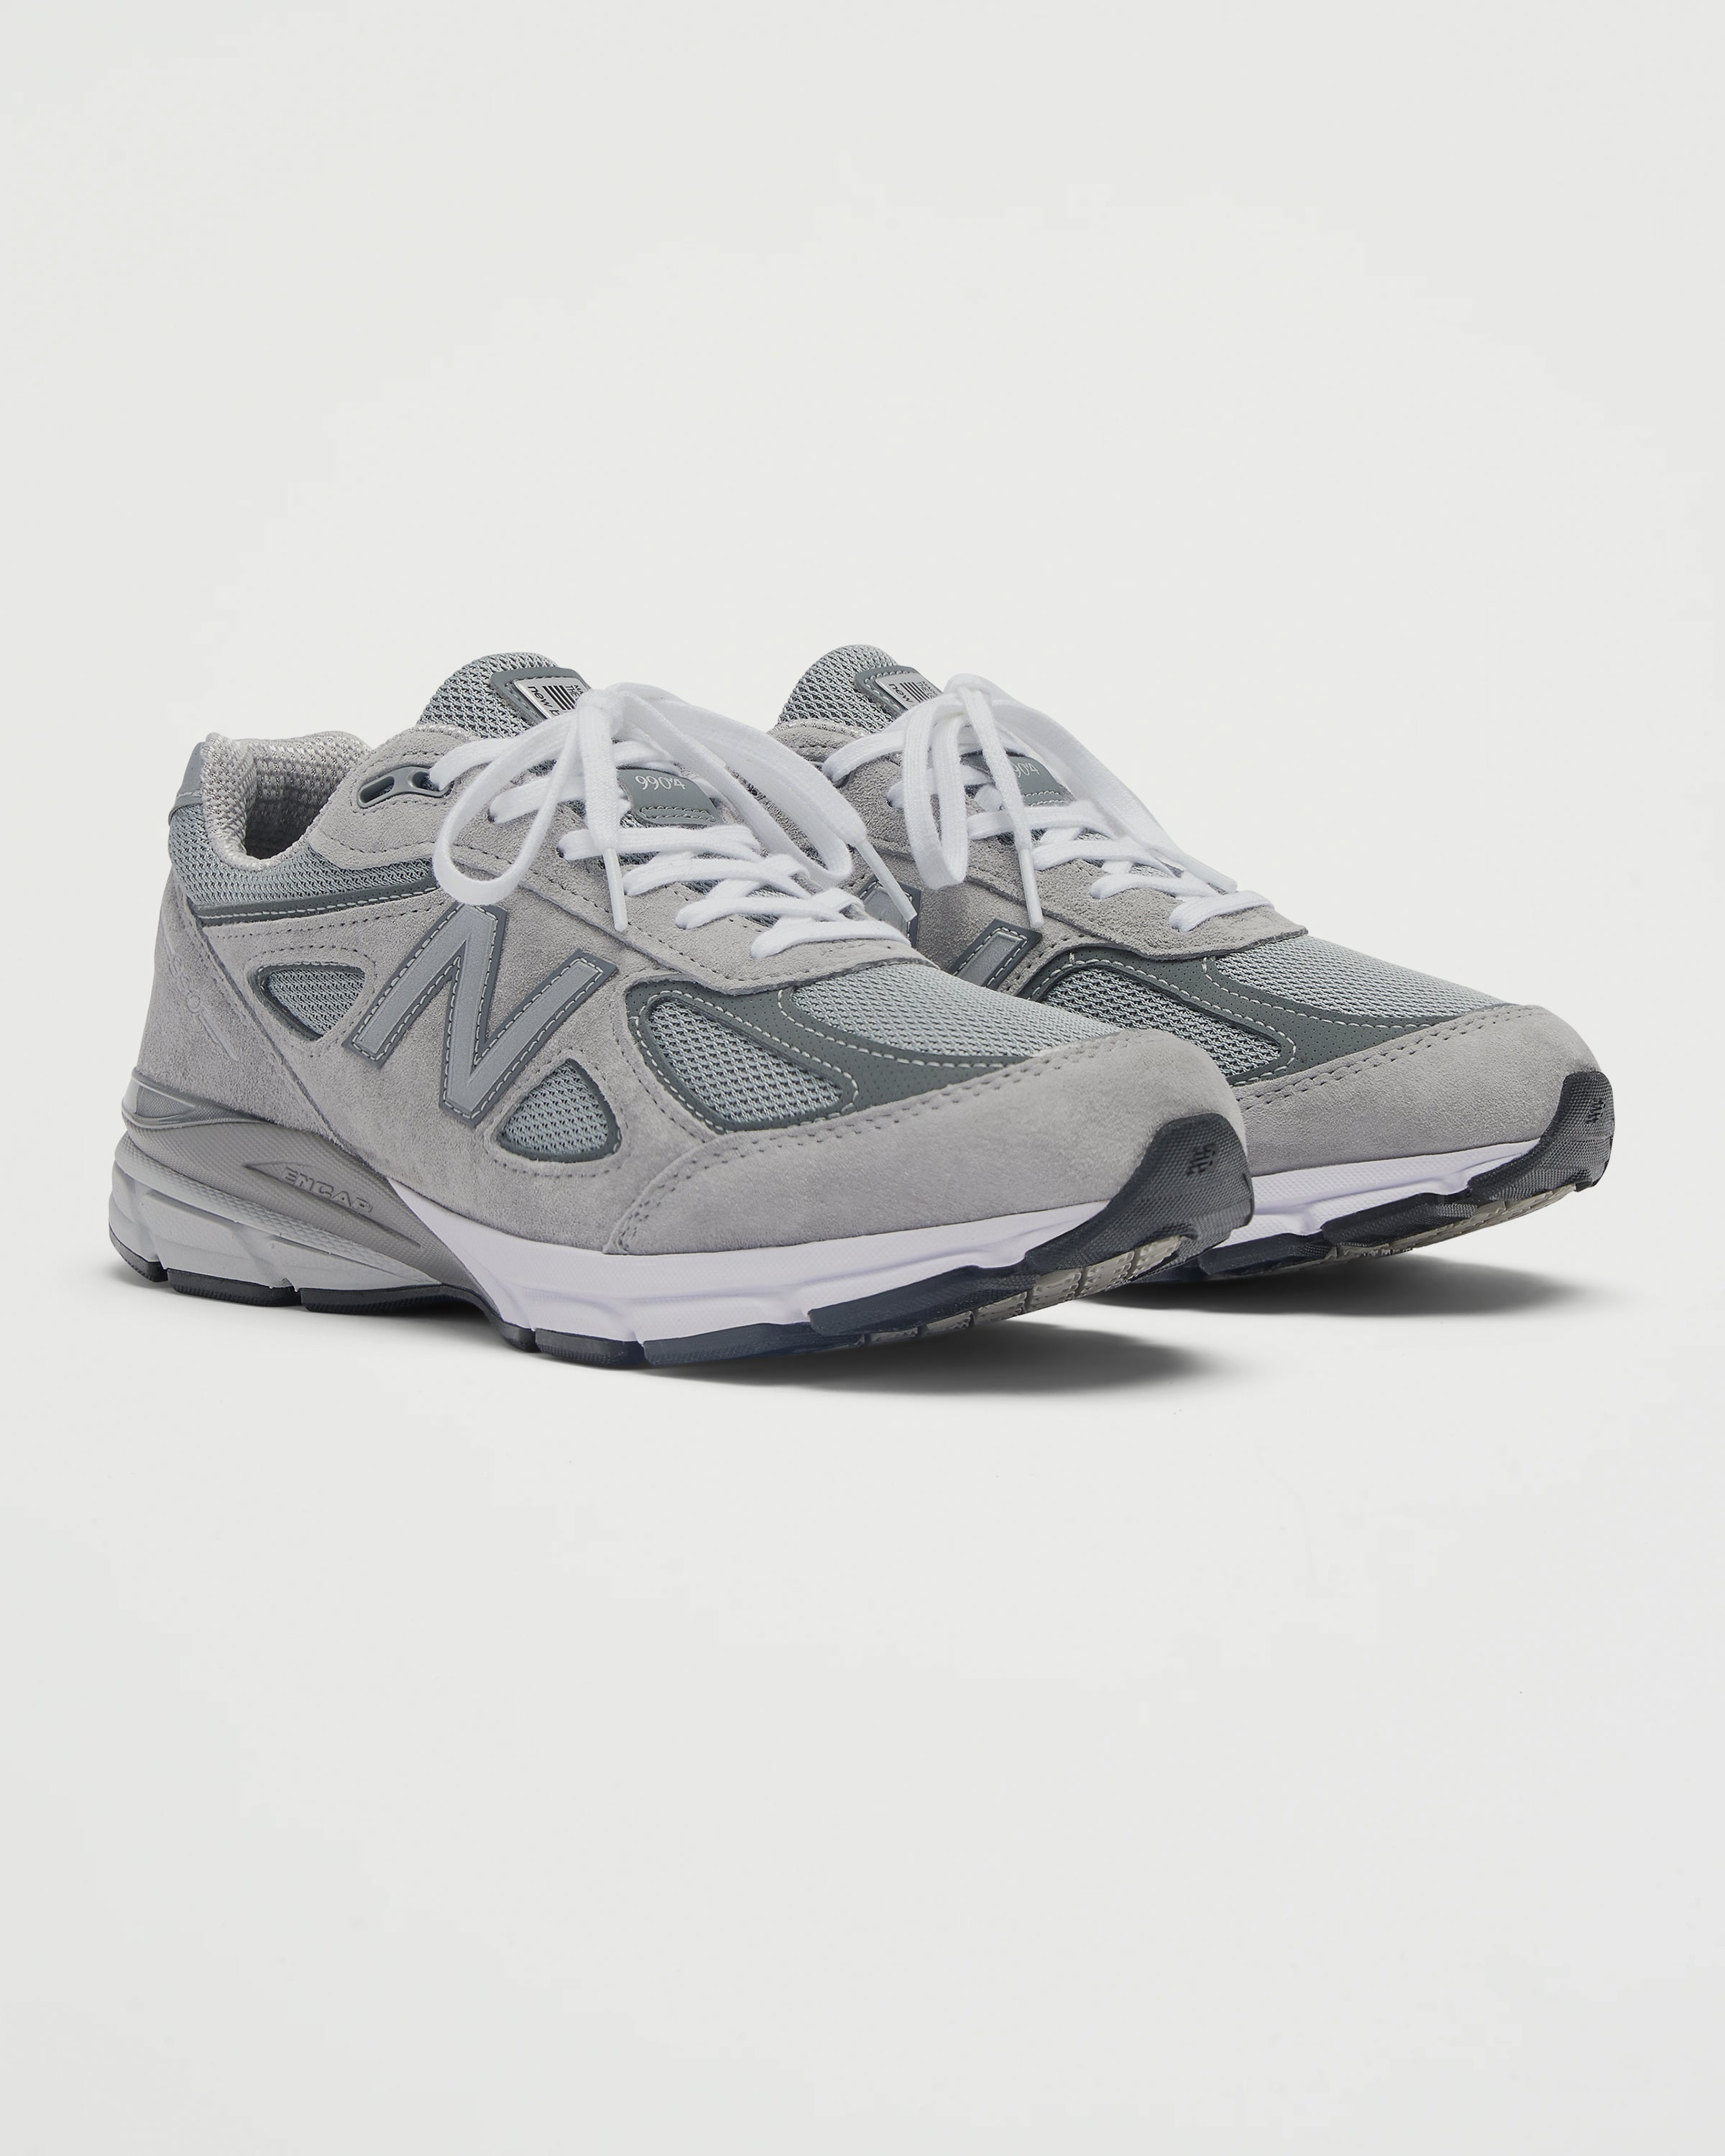 New Balance 990v4 'Made in USA' Grey Shoes Sneakers Unisex